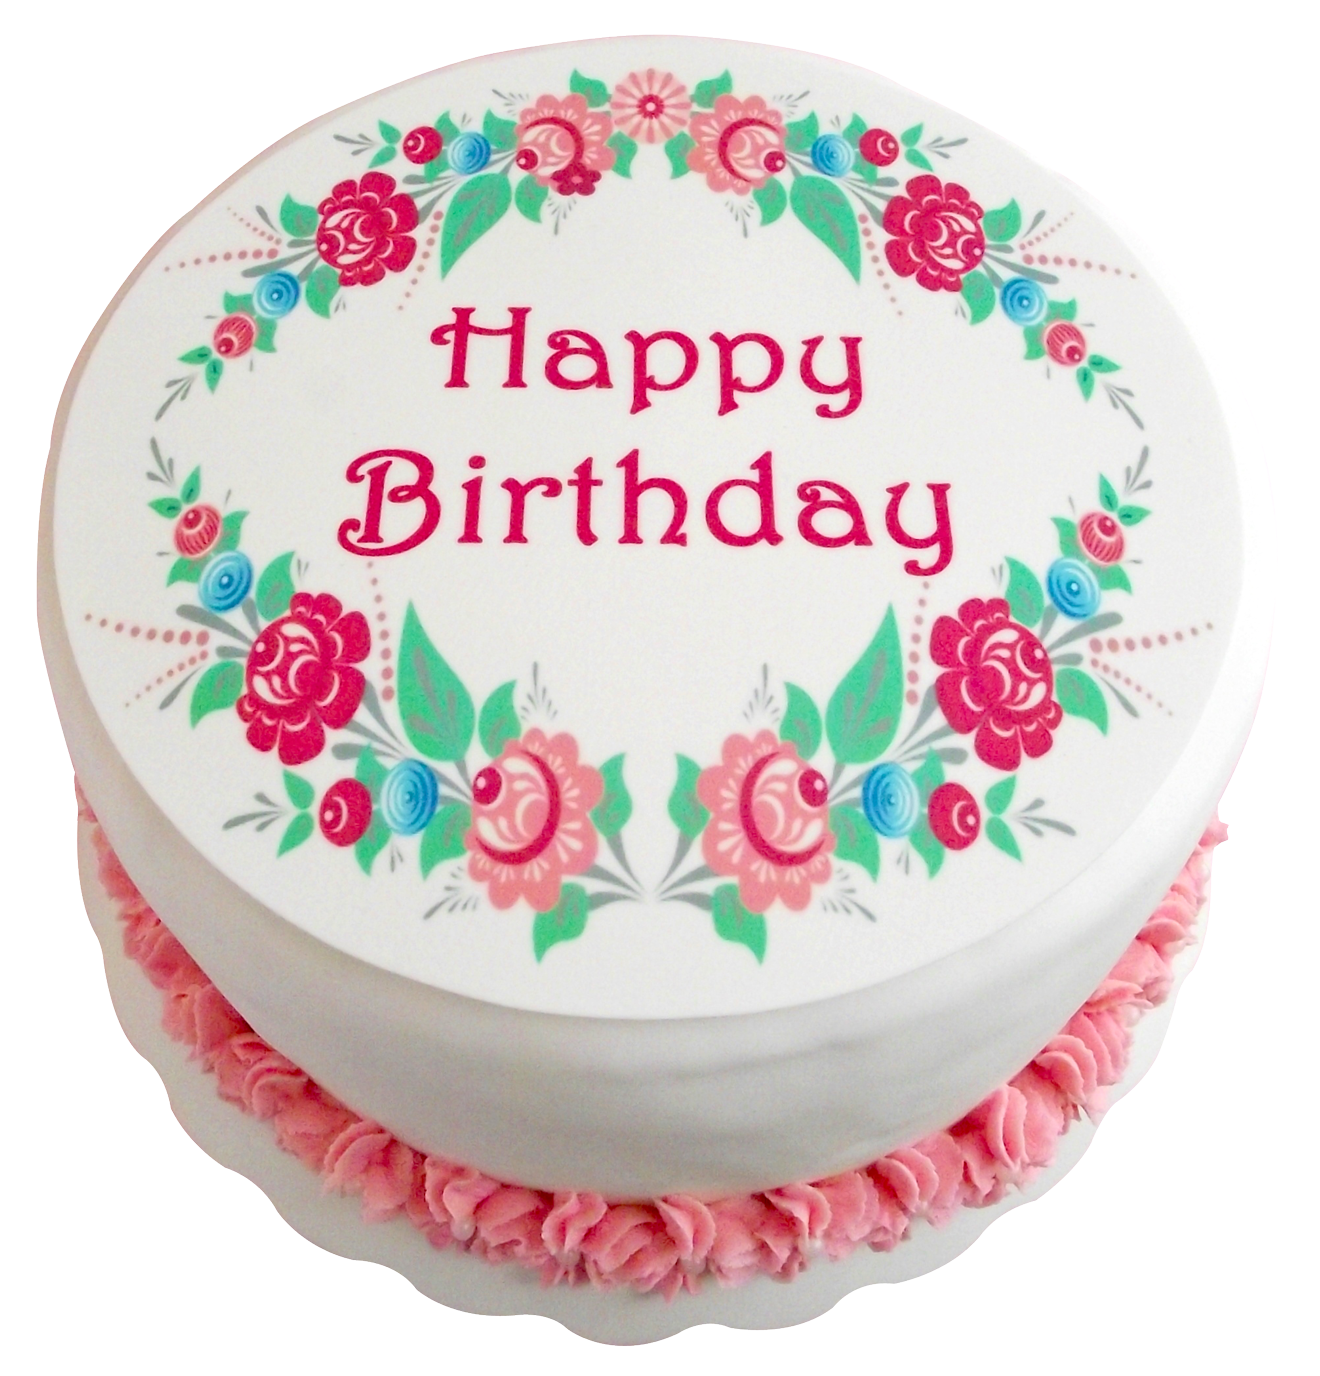 Birthday Cake PNG Clip Art Image  Gallery Yopriceville  HighQuality  Free Images and Transparent PNG Clipart